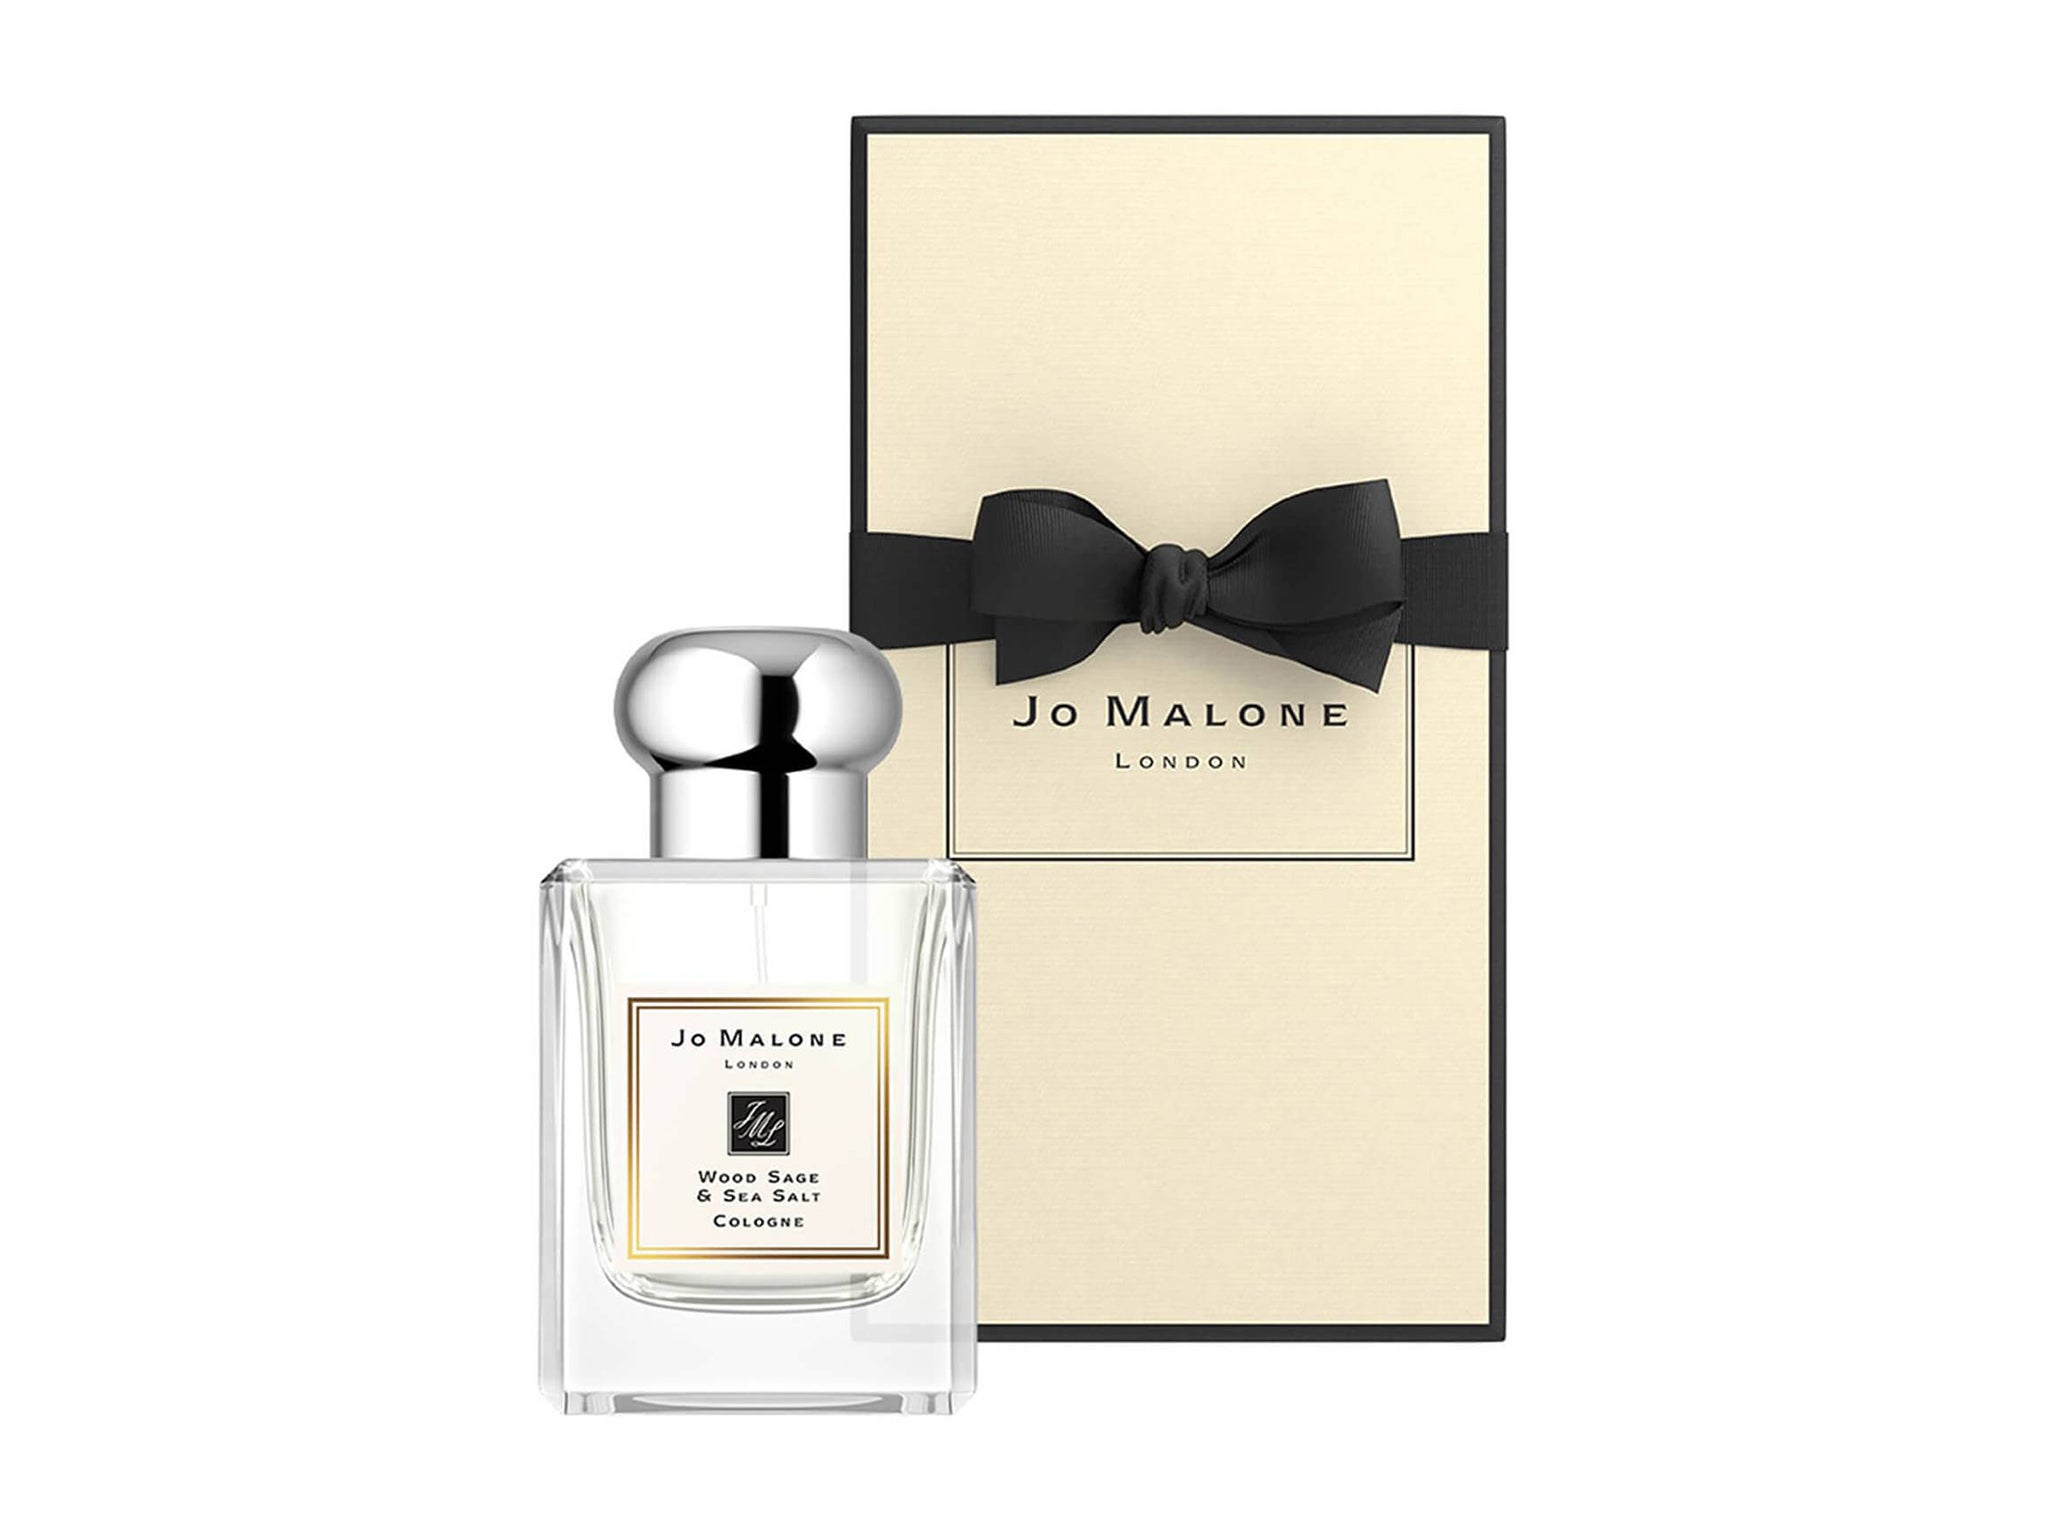 best-gift-for-her-jo-malone-fragrance-indybest.jpg